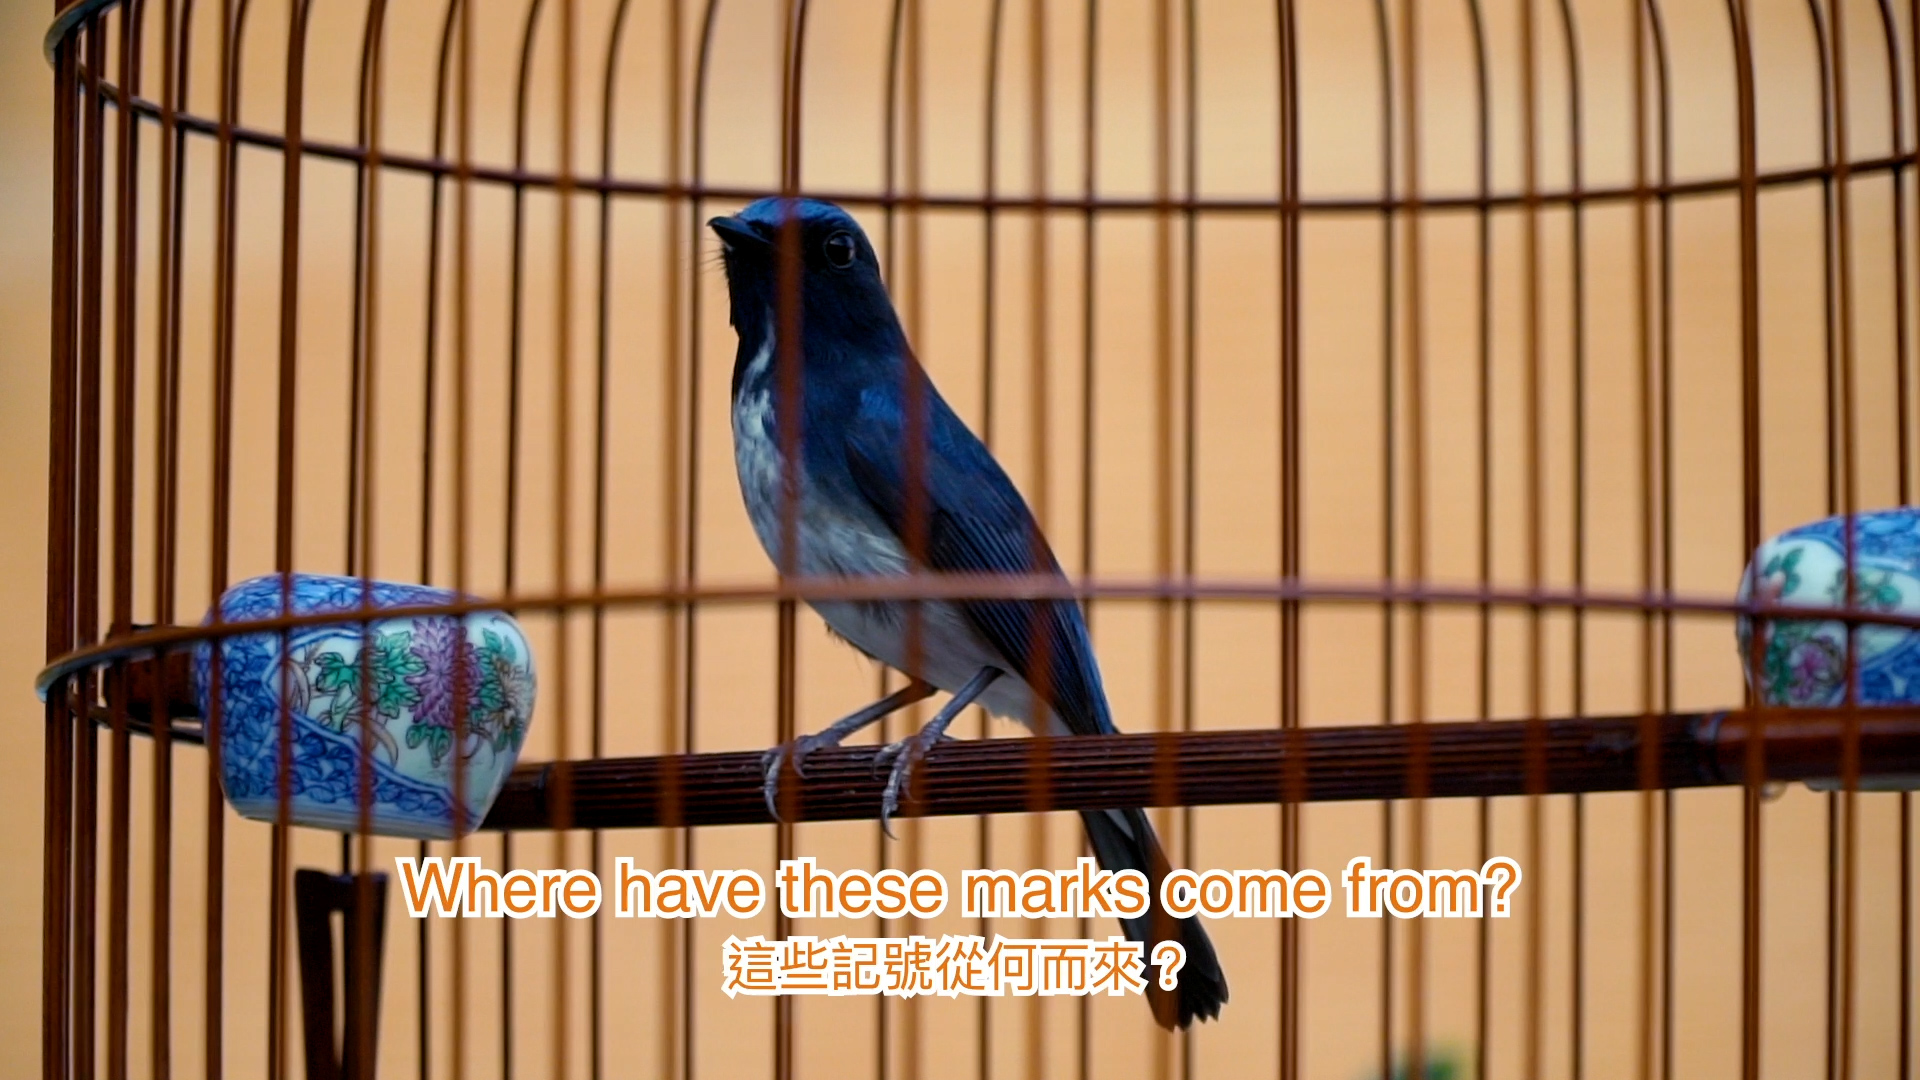 A bird in a cage sits on its perch, beneath it are words in Chinese and English saying Where id you get those marks from?